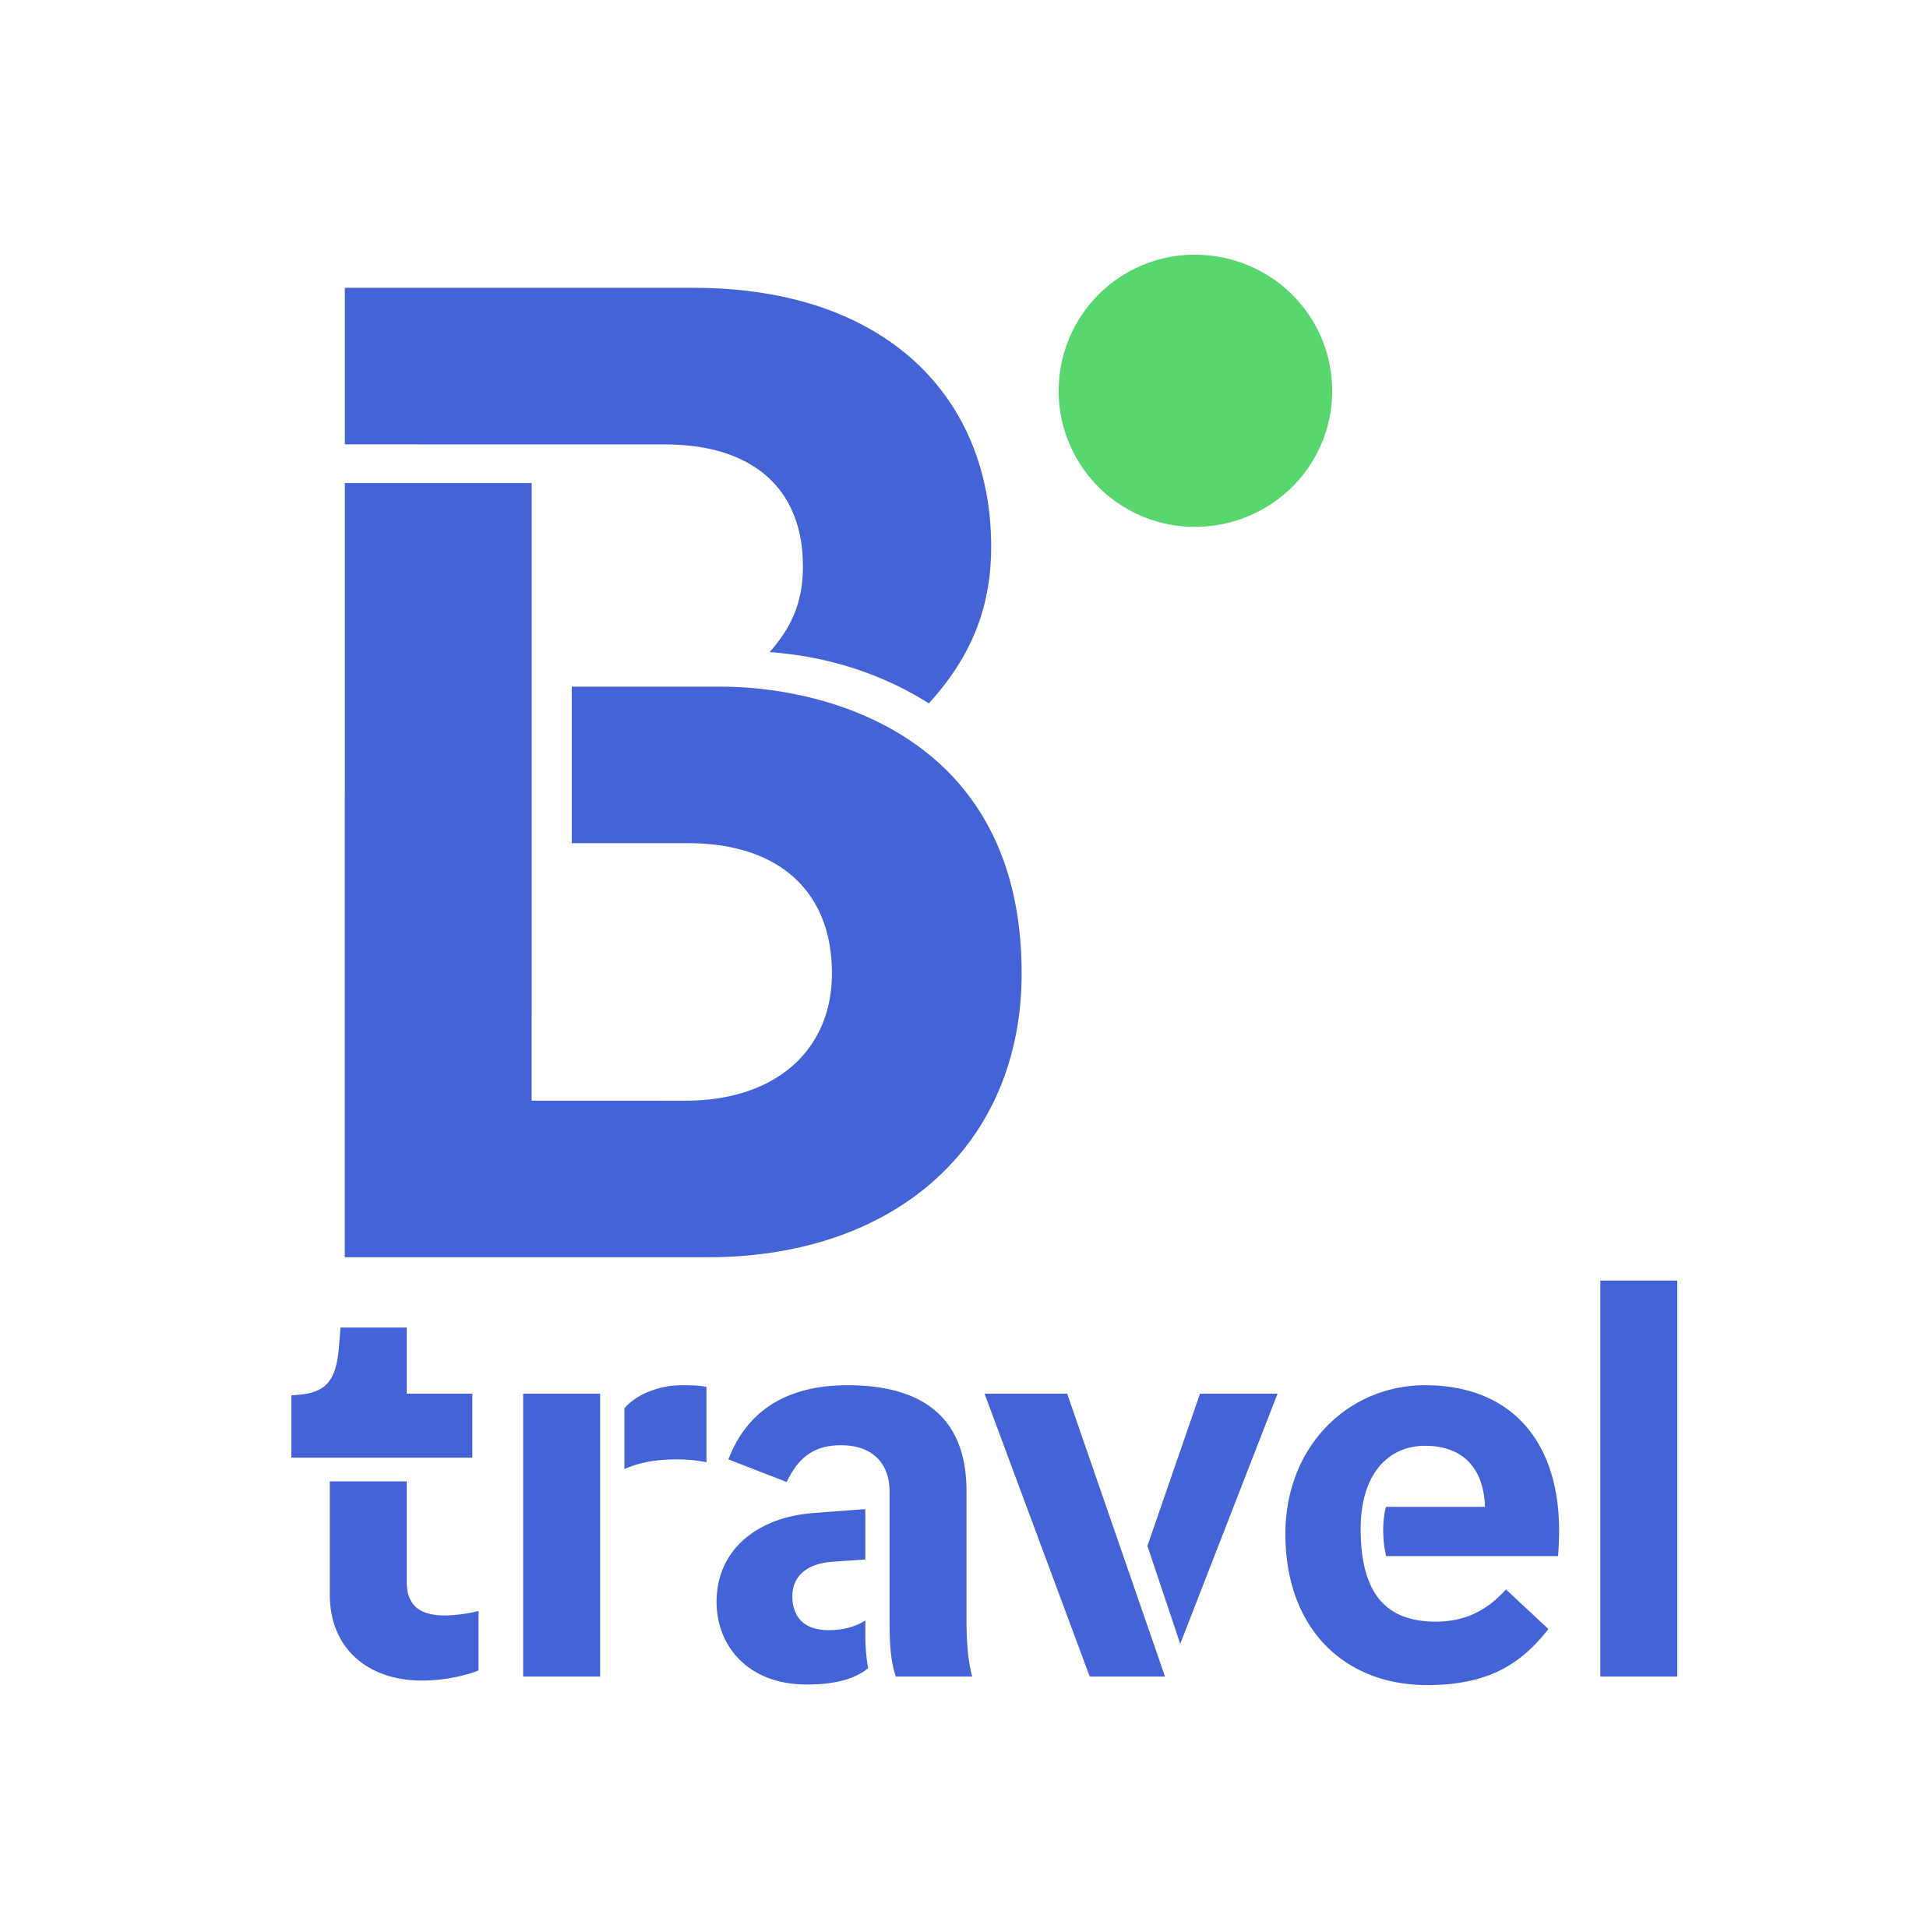 Logo of the travel agency B the travel brand